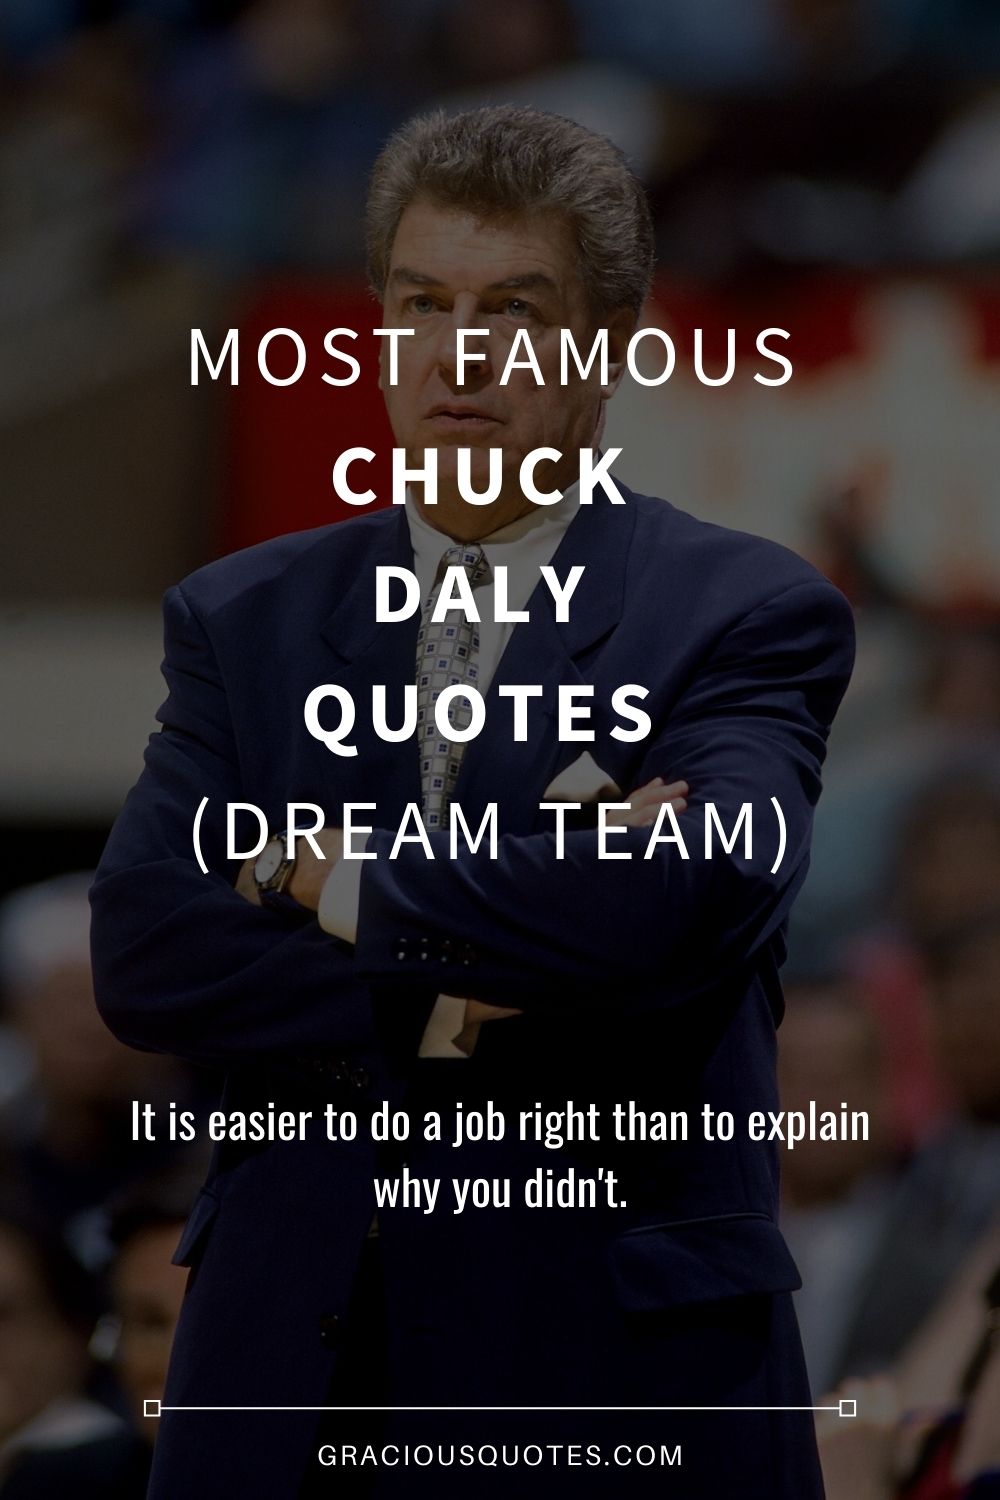 Most Famous Chuck Daly Quotes (DREAM TEAM) - Gracious Quotes